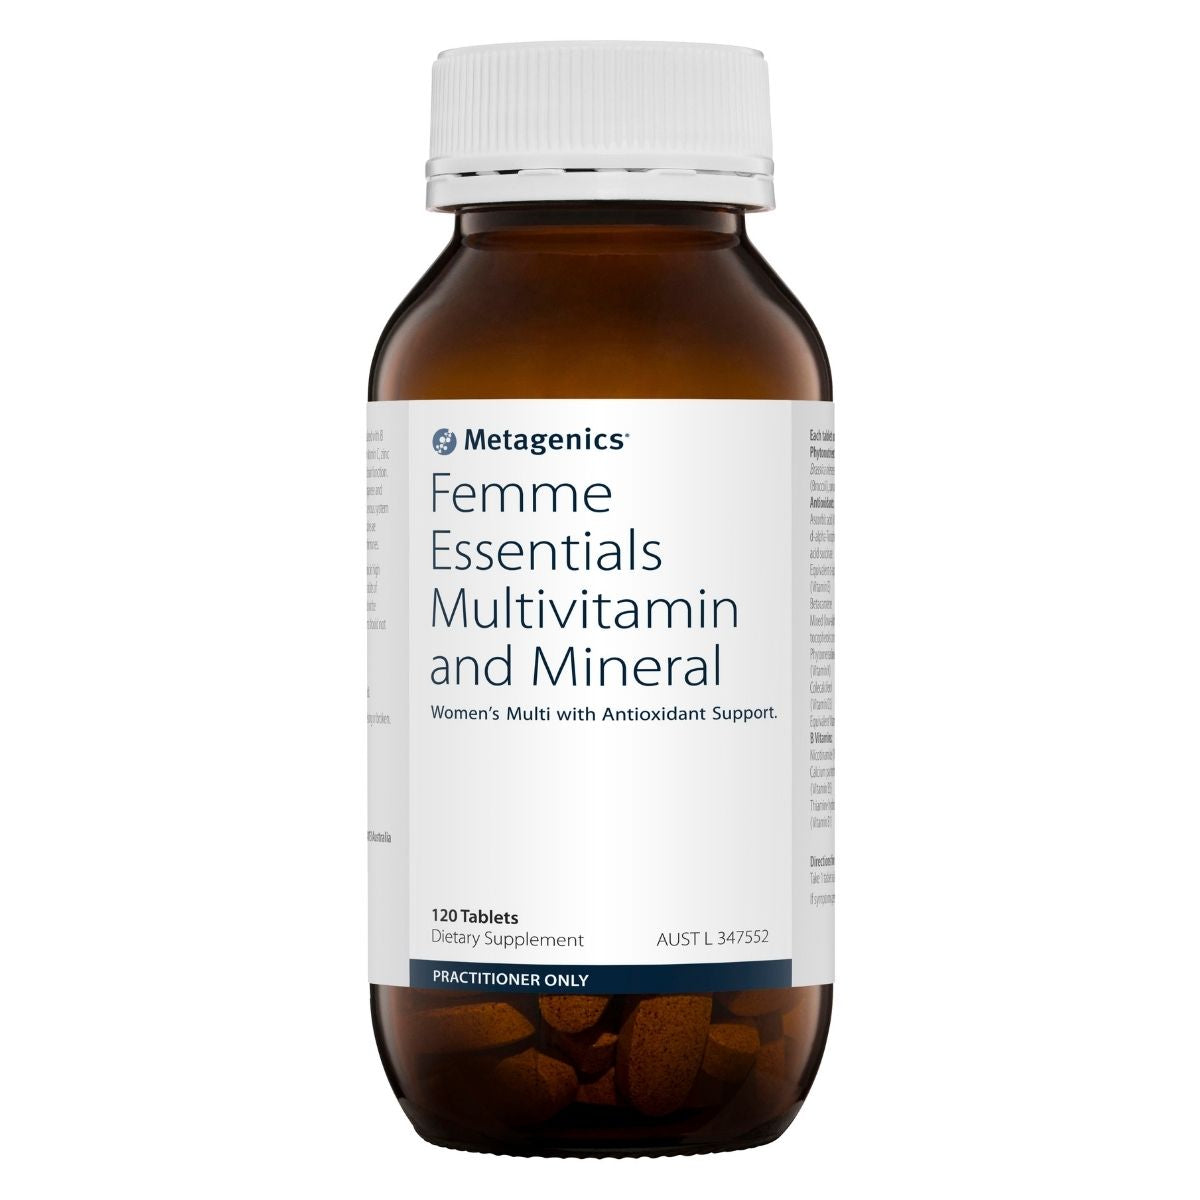 Metagenics Femme Essentials Multivitamin and Mineral 120 tablets | Vitality and Wellness Centre